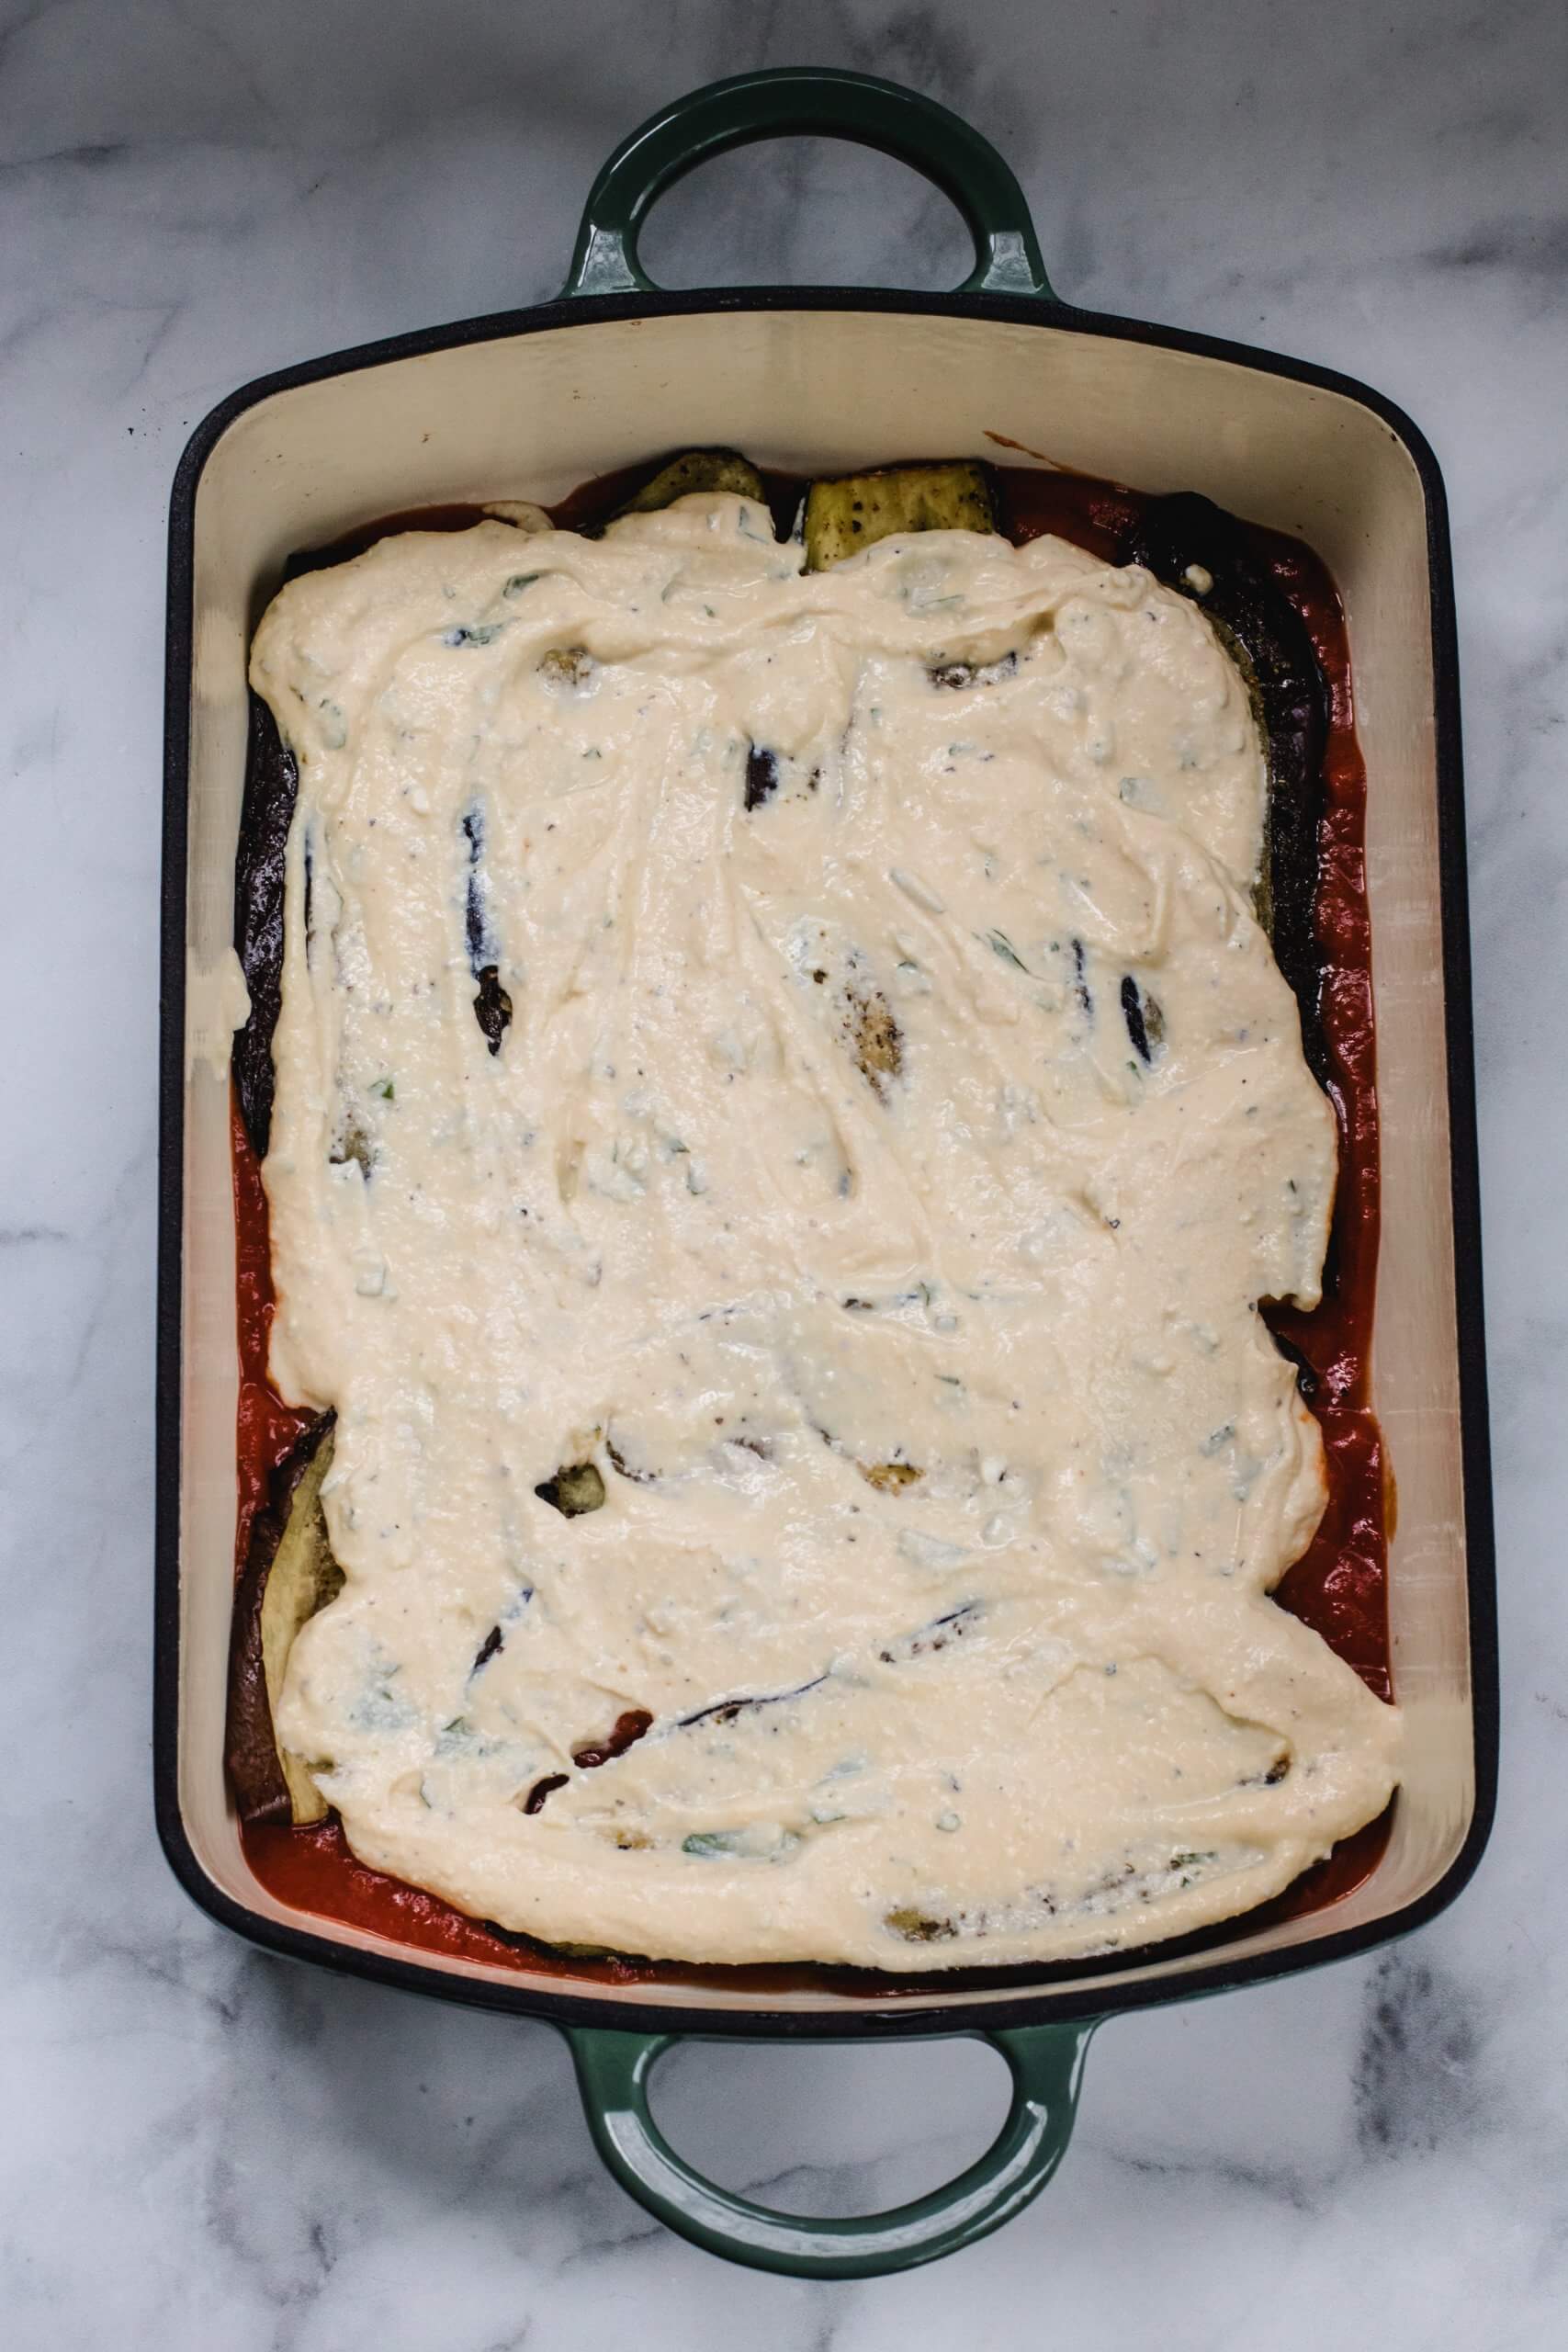 ricotta layer of the baked eggplant